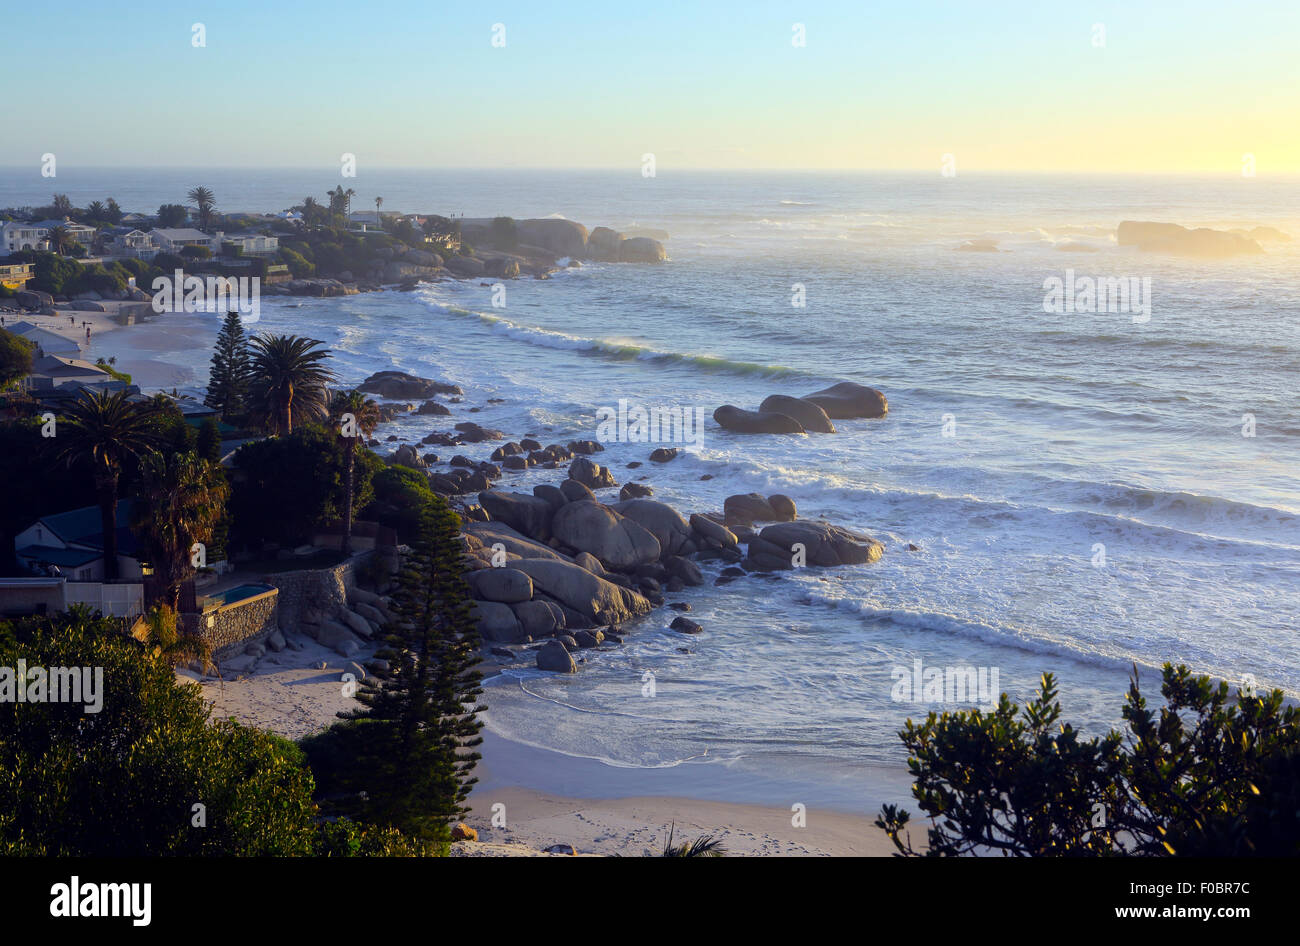 Clifton beach in Cape Town, South Africa Stock Photo